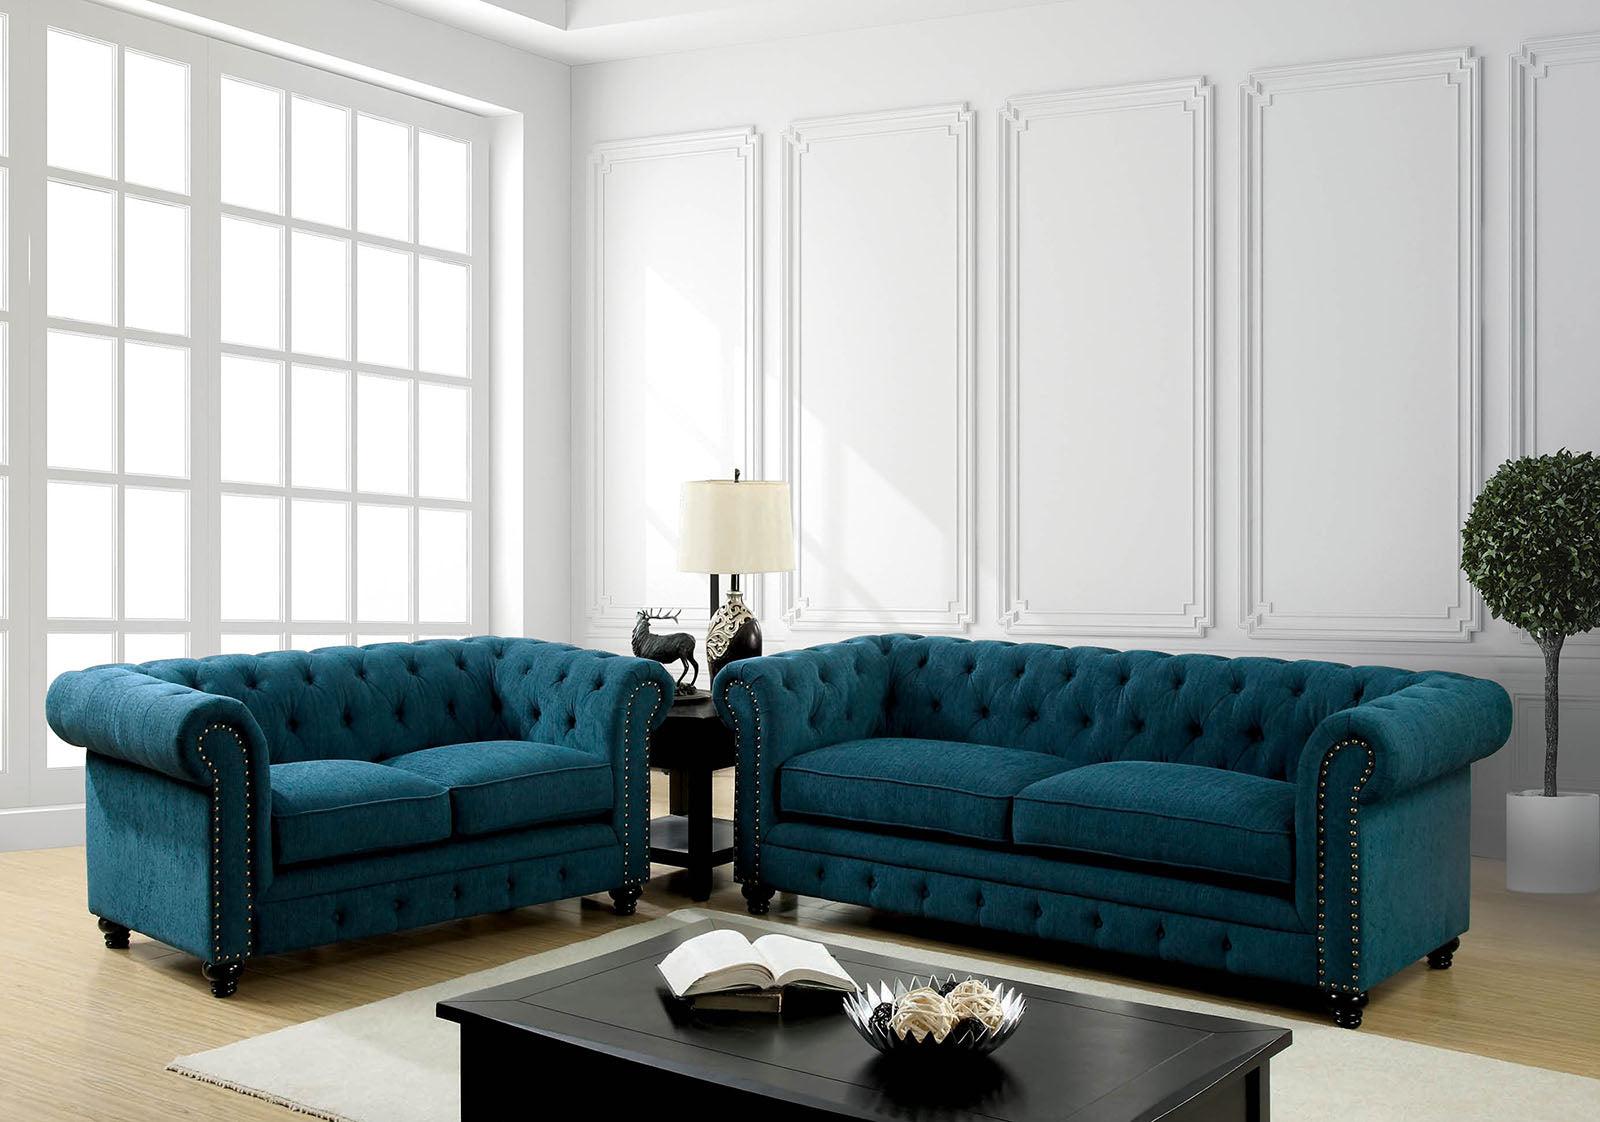 Transitional Sofa Loveseat and Chair Set CM6269TL-3PC Stanford CM6269TL-3PC in Teal 